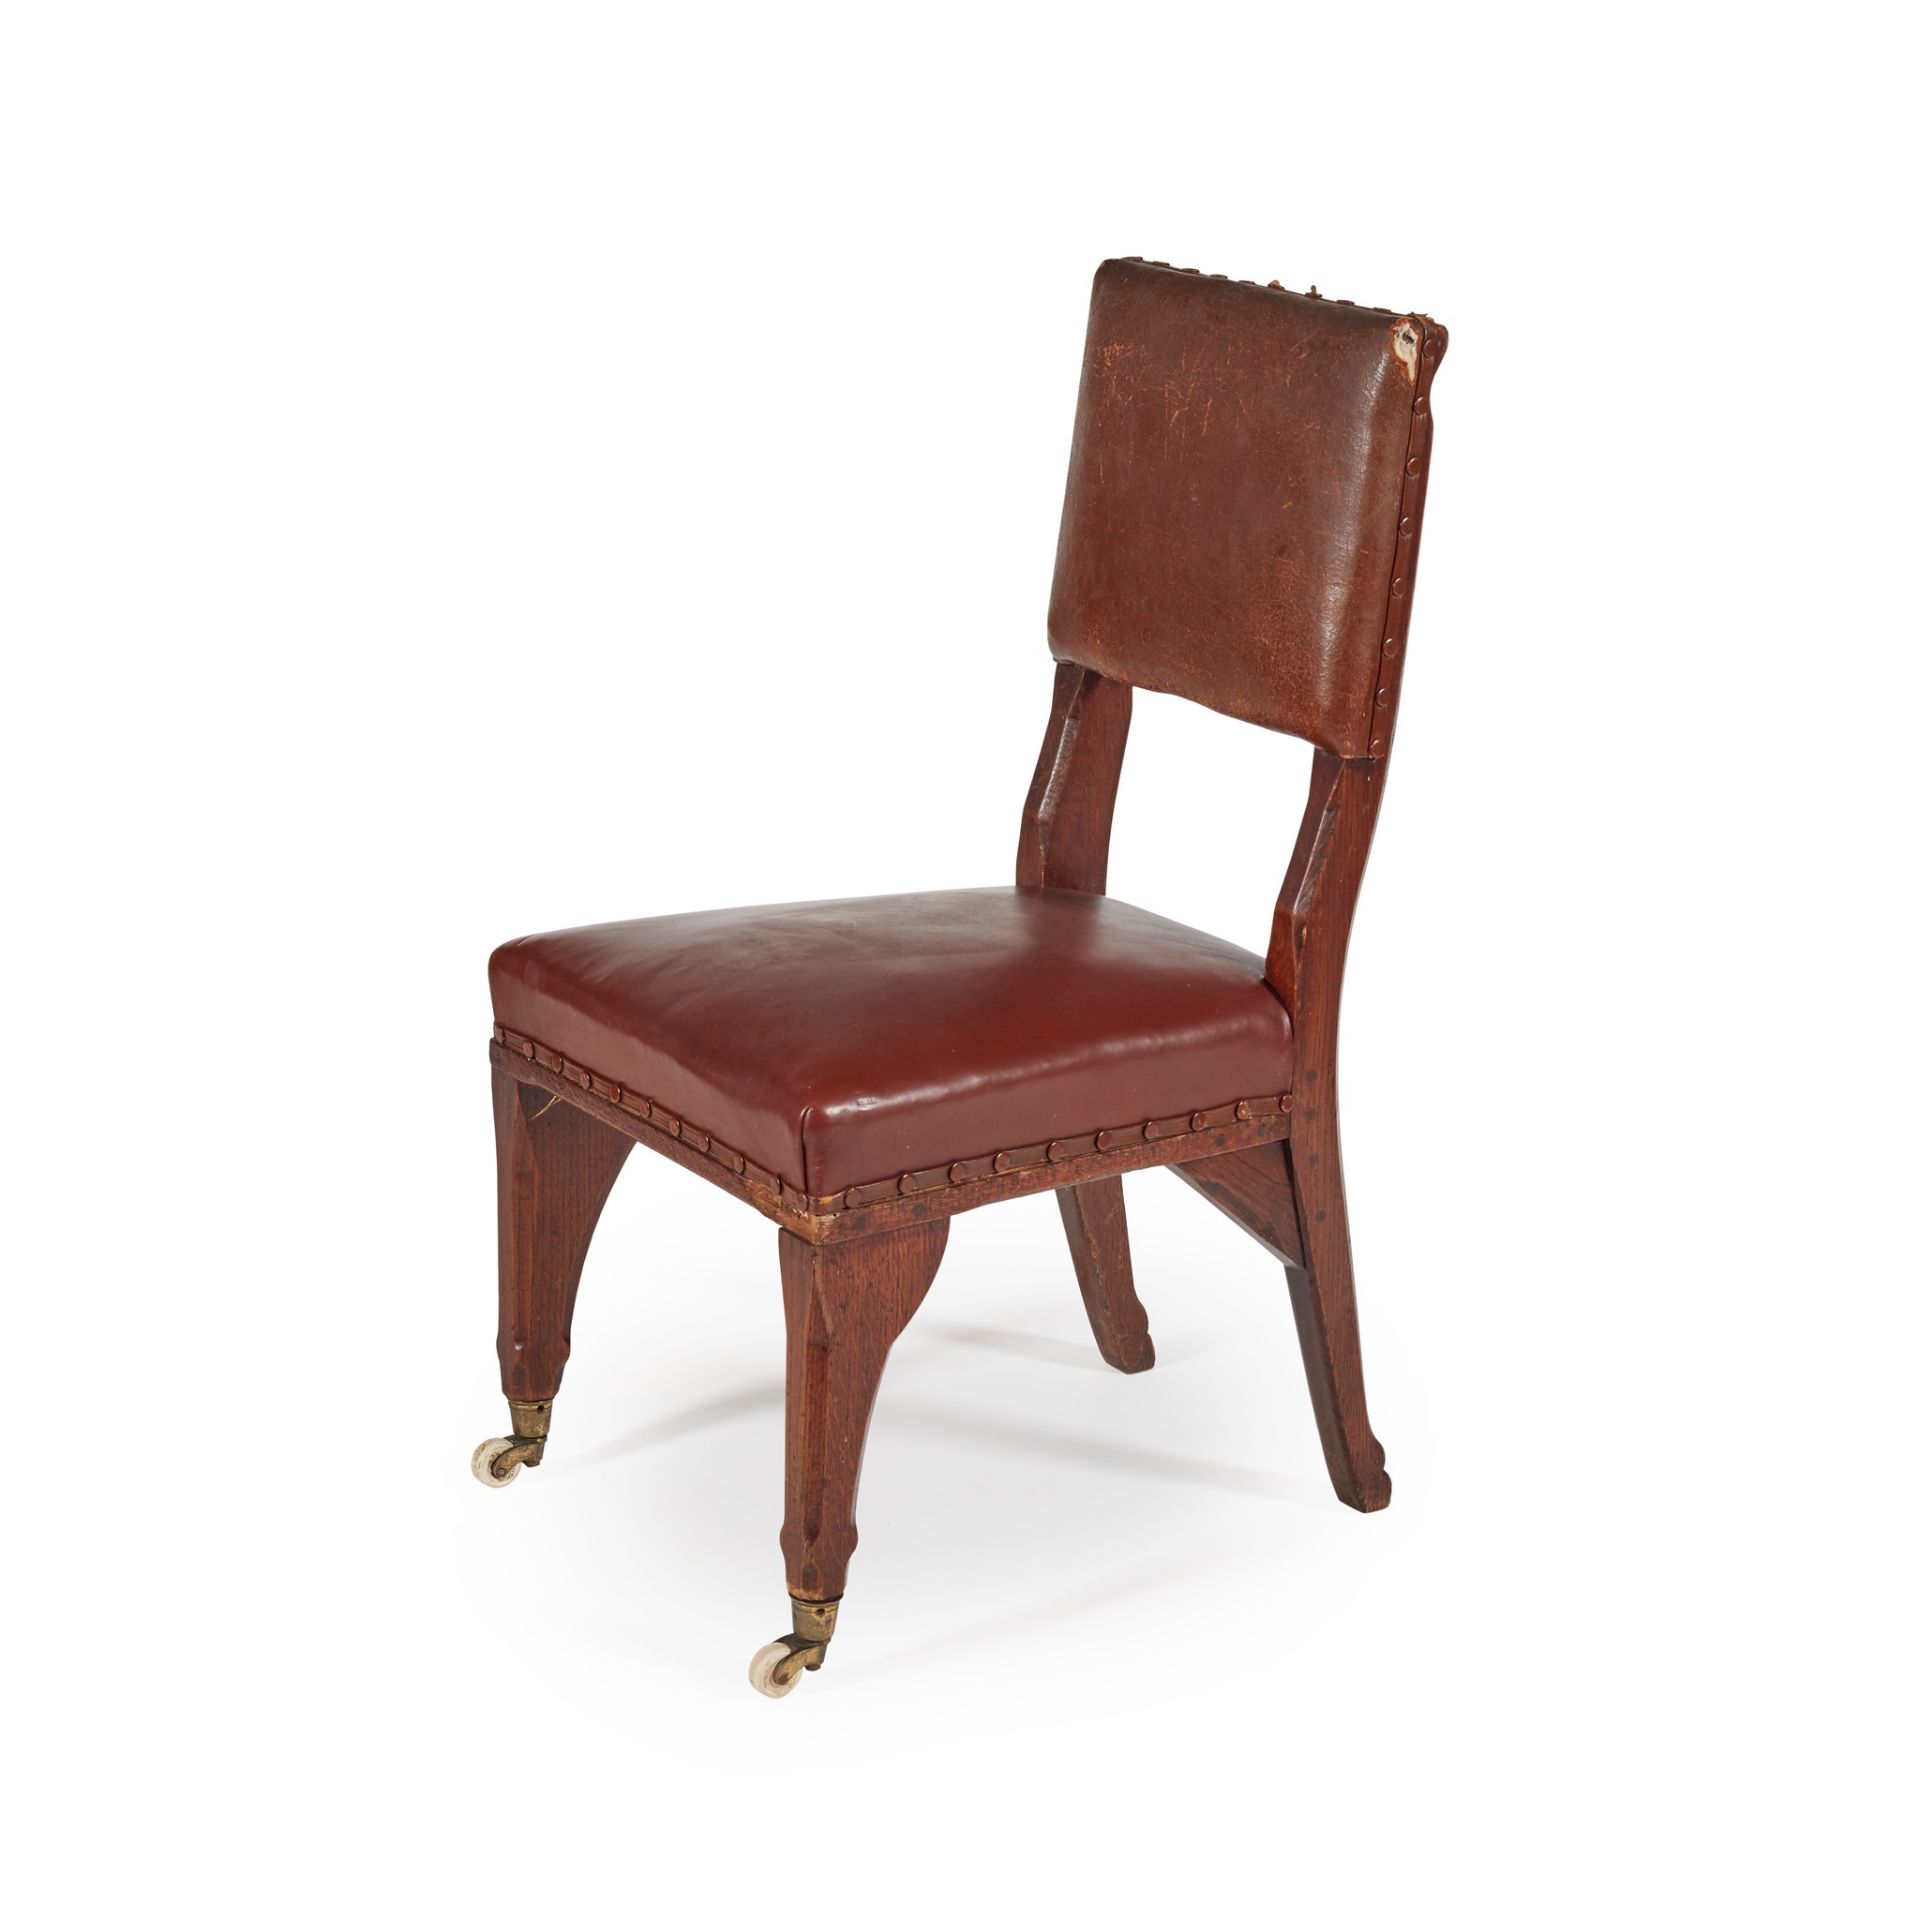 WILLIAM WHITE (1825–1900) SET OF EIGHT GOTHIC REVIVAL DINING CHAIRS, CIRCA 1860 - Image 5 of 6